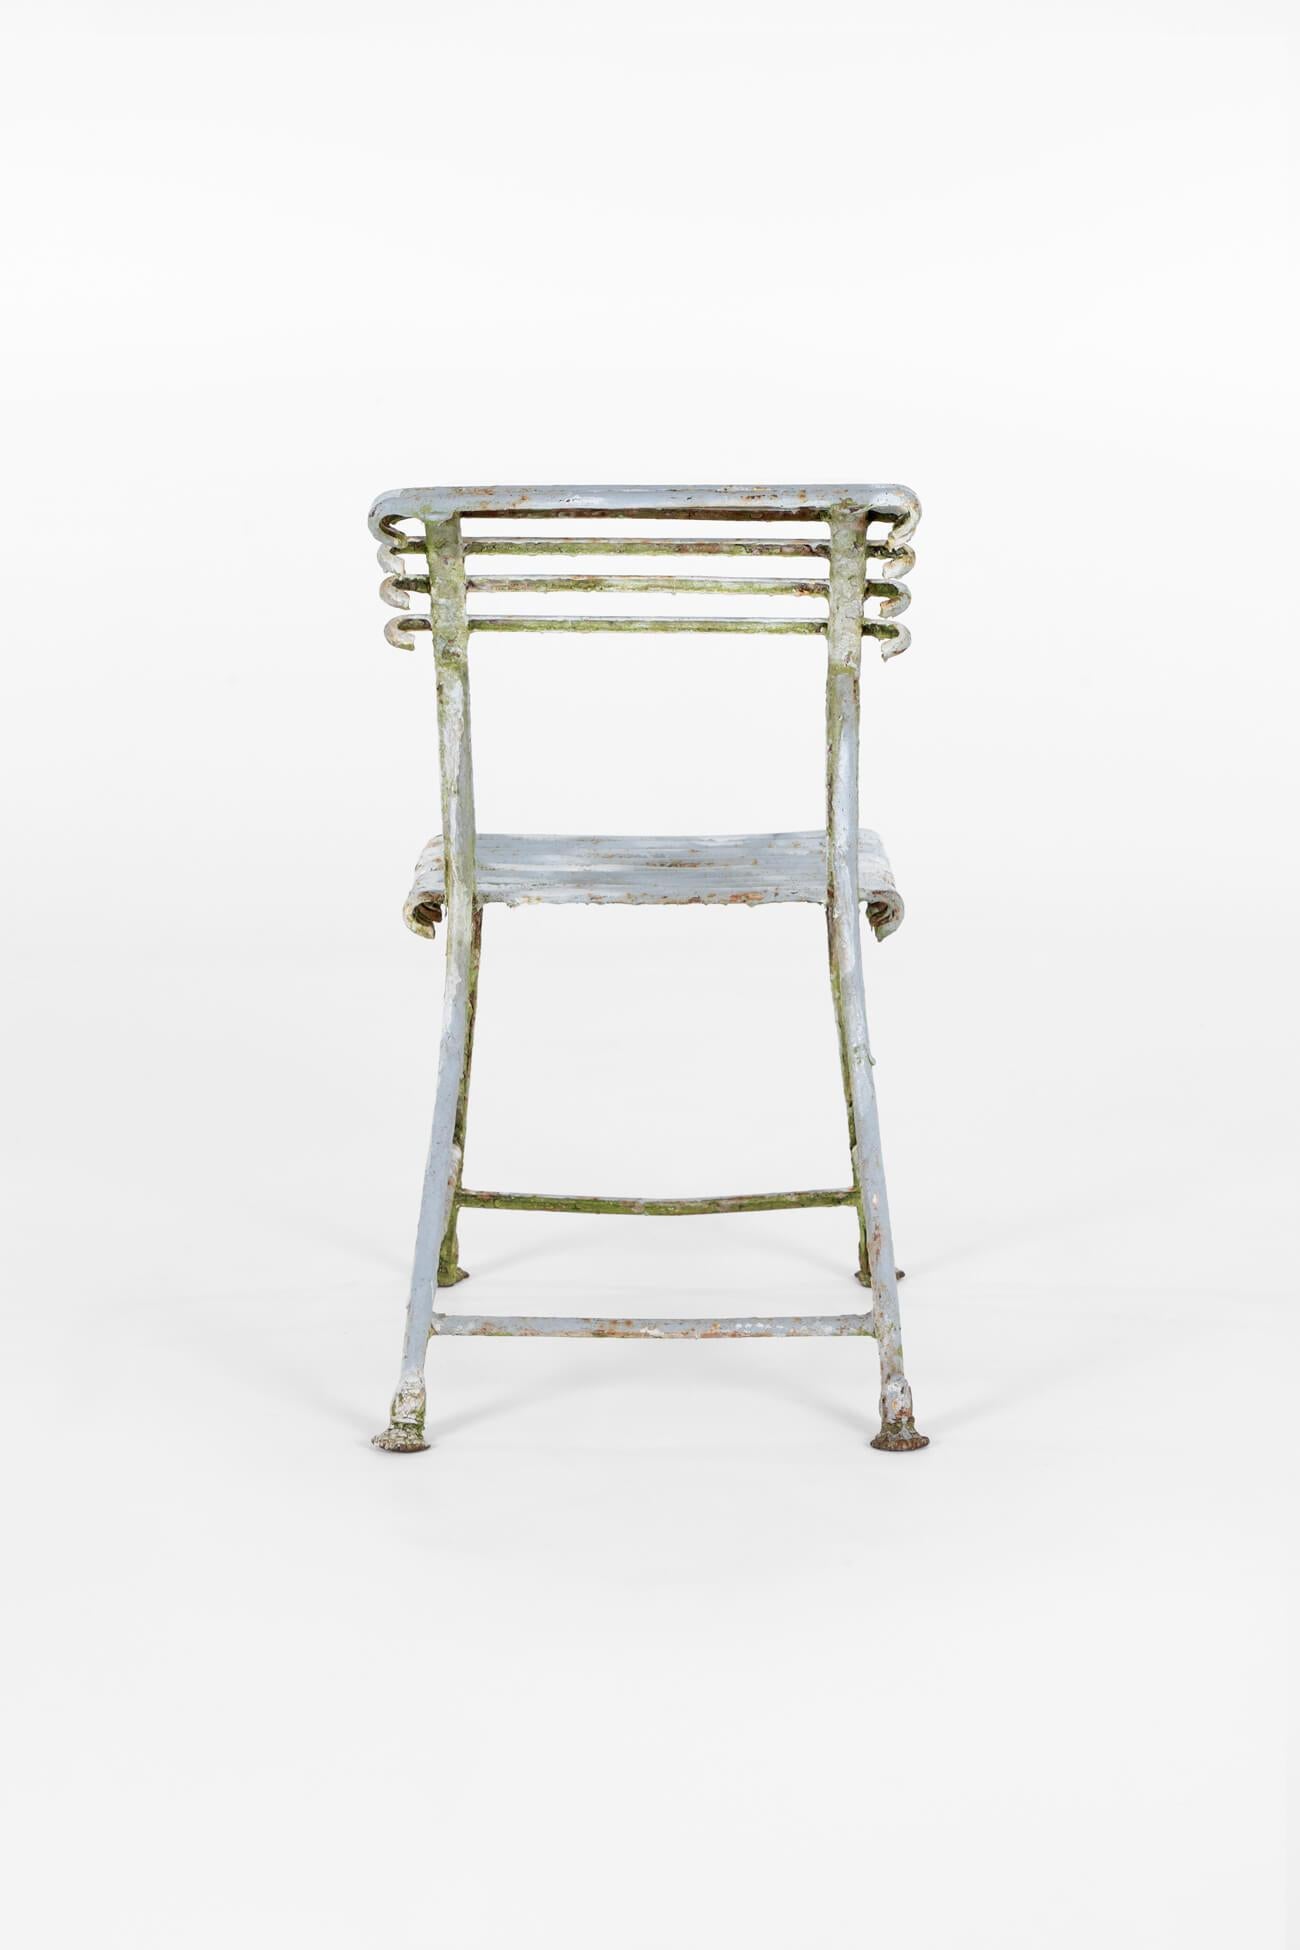 French Provincial Early Arras Orangery Chair For Sale